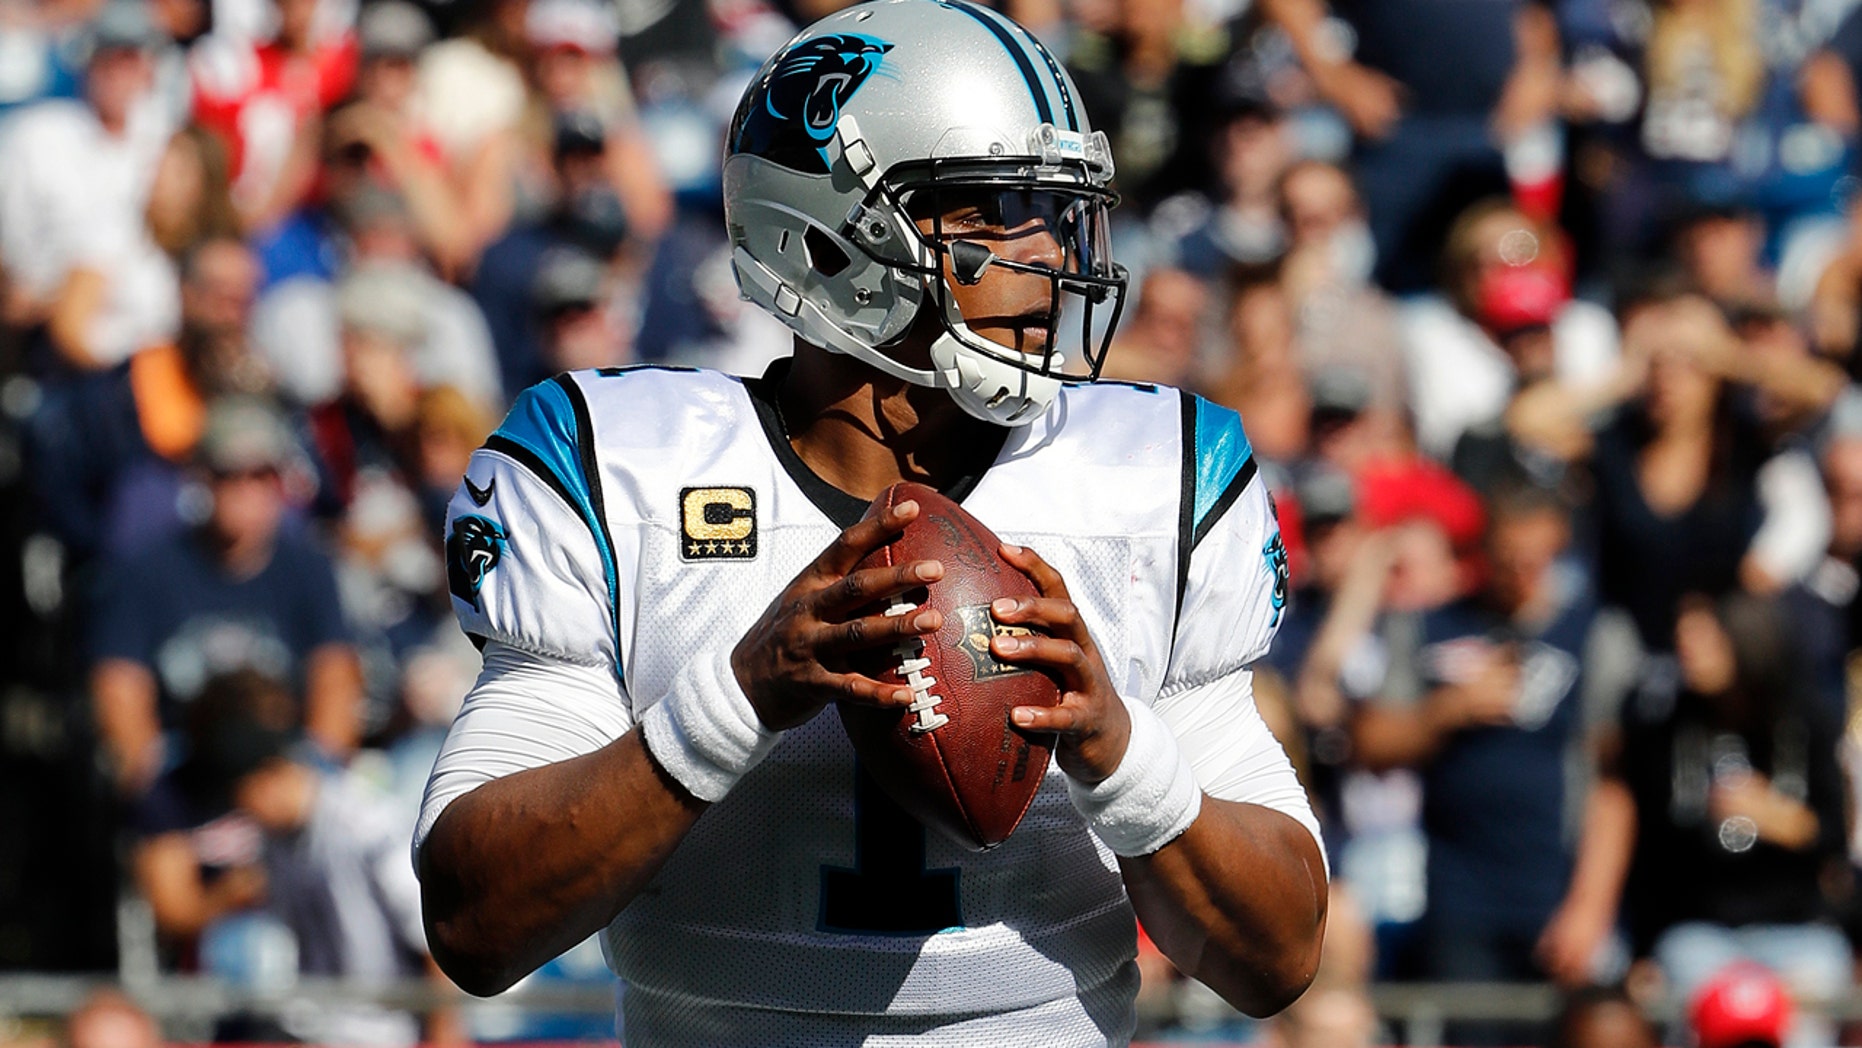 Nfl S Cam Newton Apologizes For Remark Deemed As Sexist Fox News